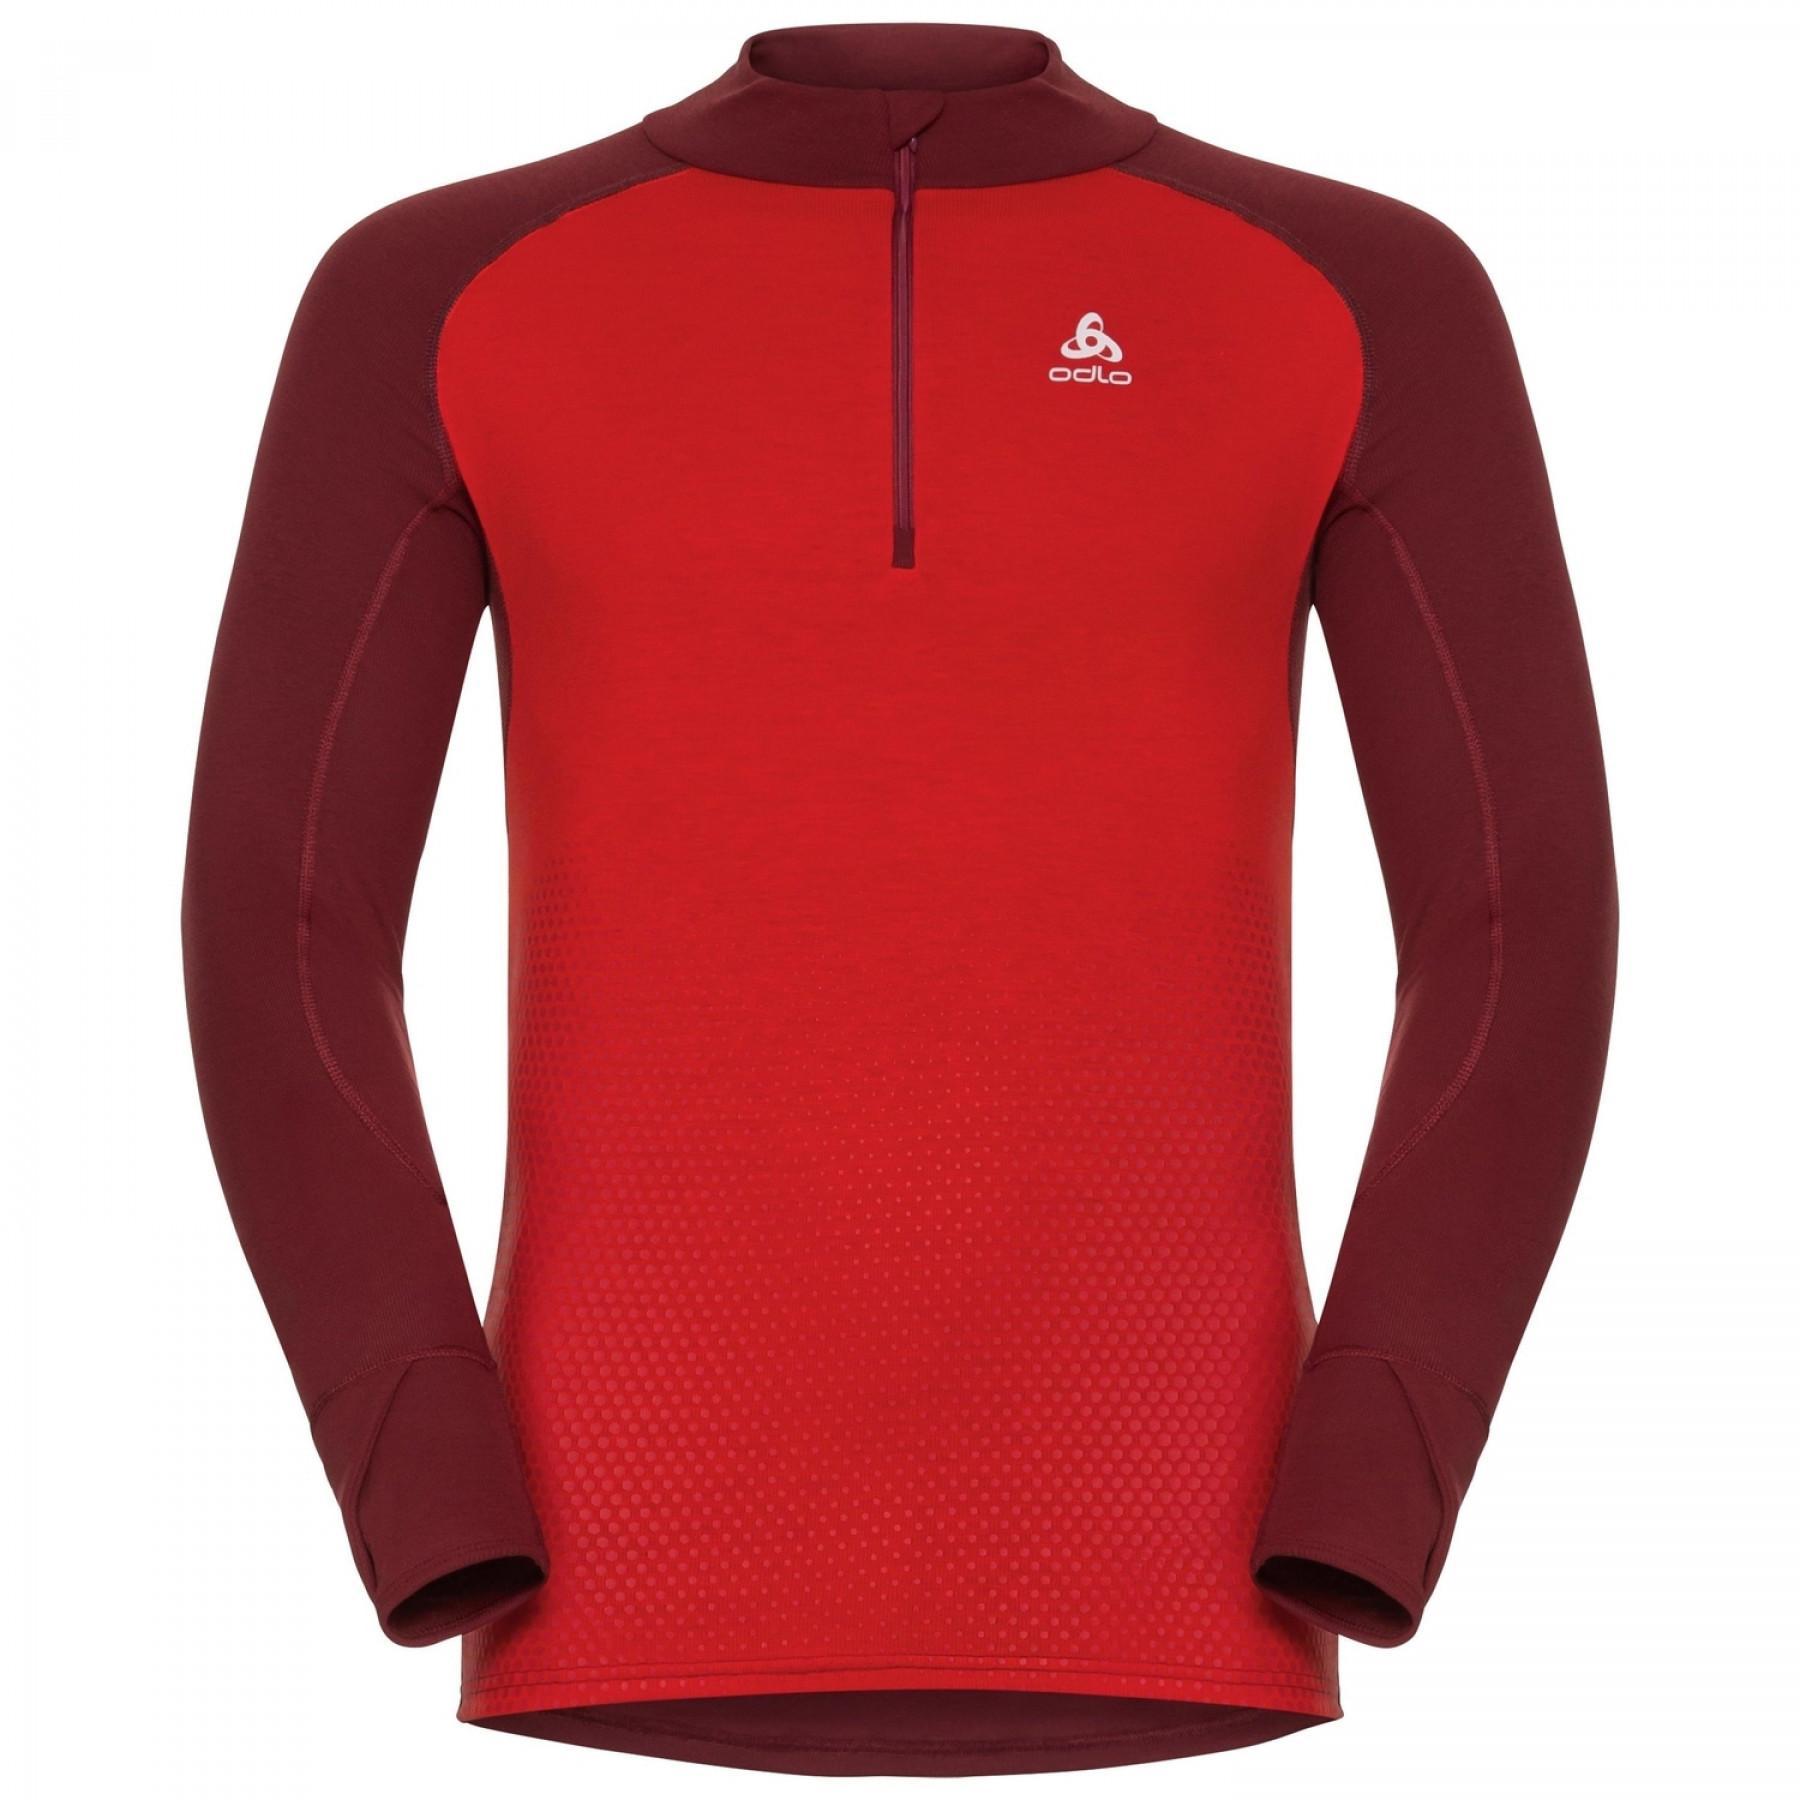 Maillot L/S Odlo Col ras du cou Performance Muscle Running Warm